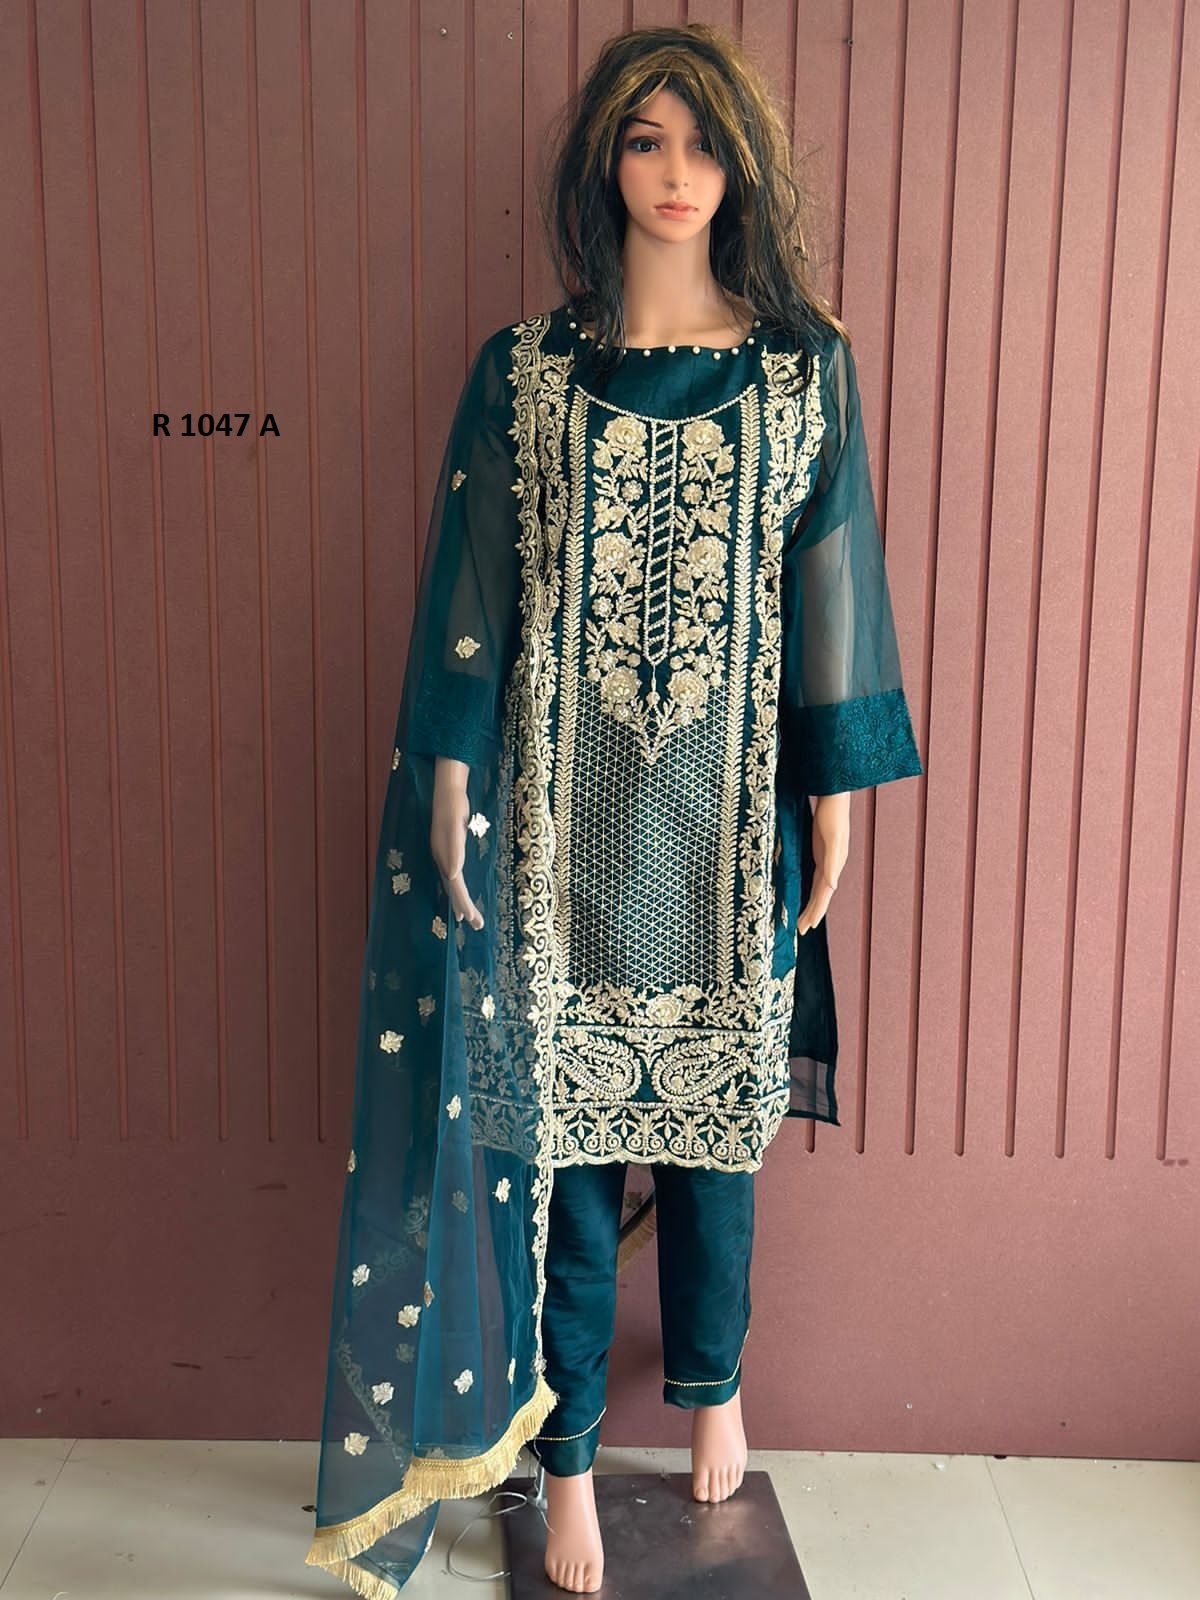 SHREE FABS R 1047 A READYMADE PAKISTANI SUITS IN INDIA